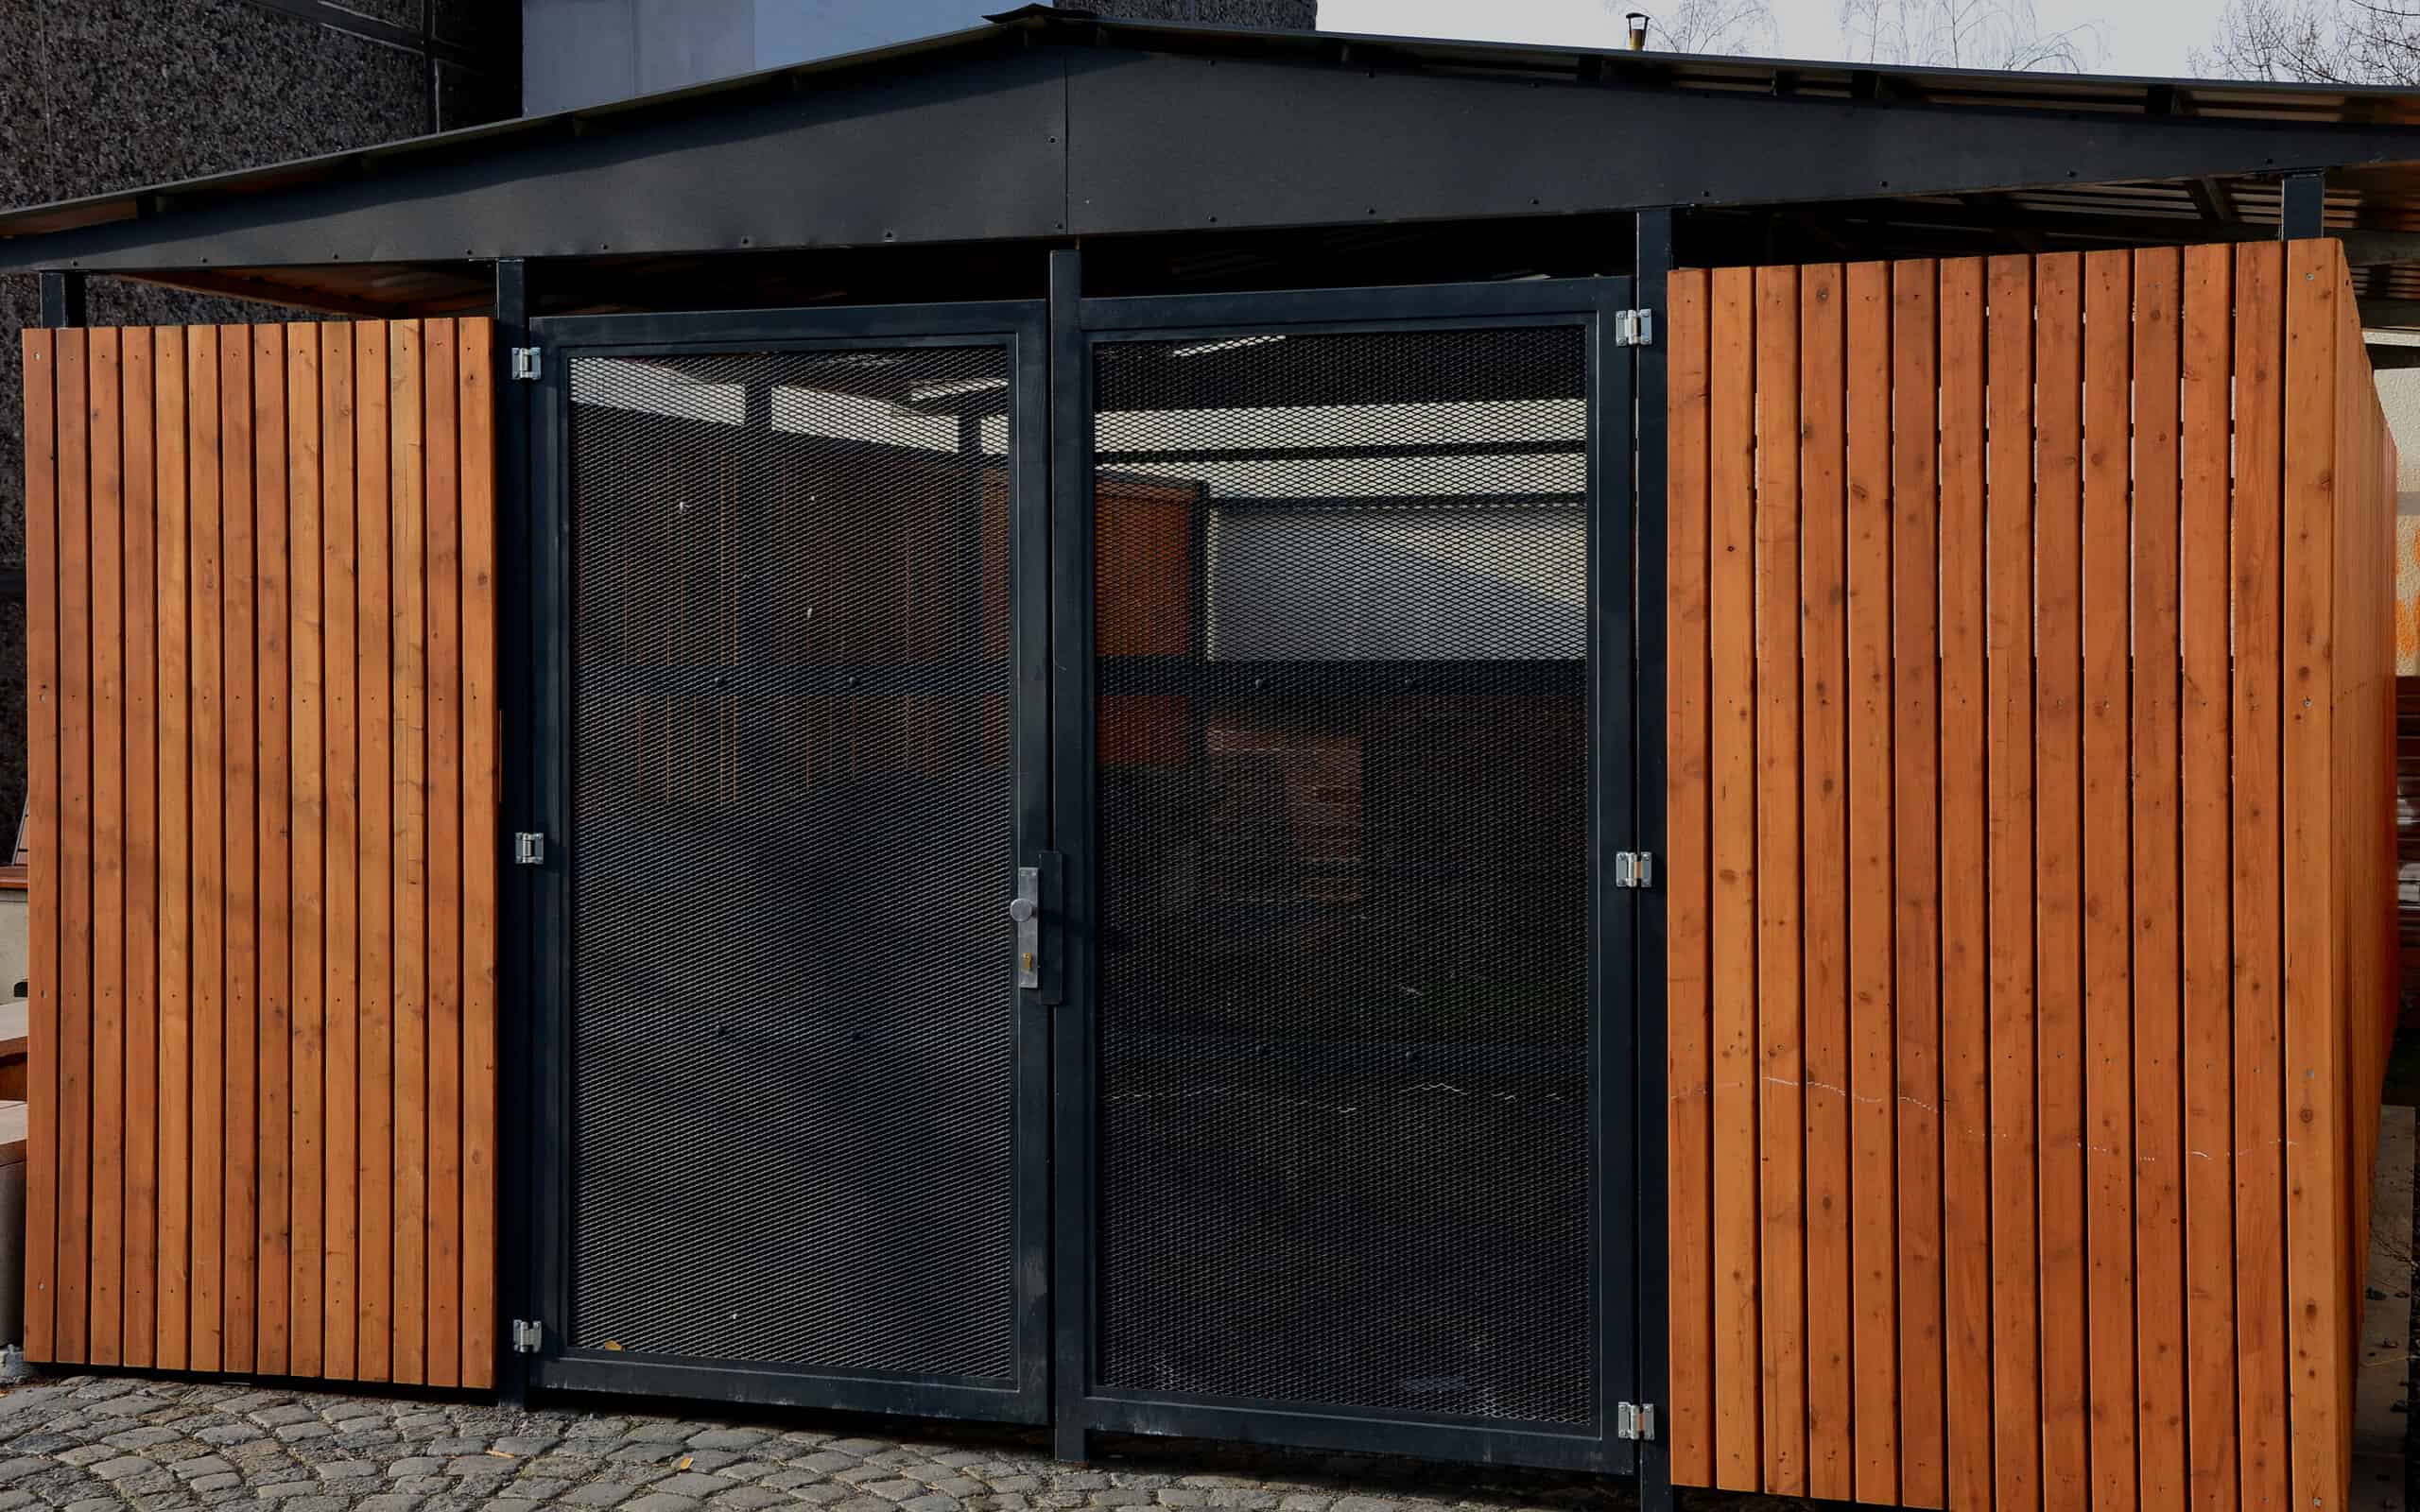 garage with wooden paneling and transparent mesh door. bin storage near the boarding house. protects citizens' property and order in the closed shelter. car parking safe and without snow, cobblestone